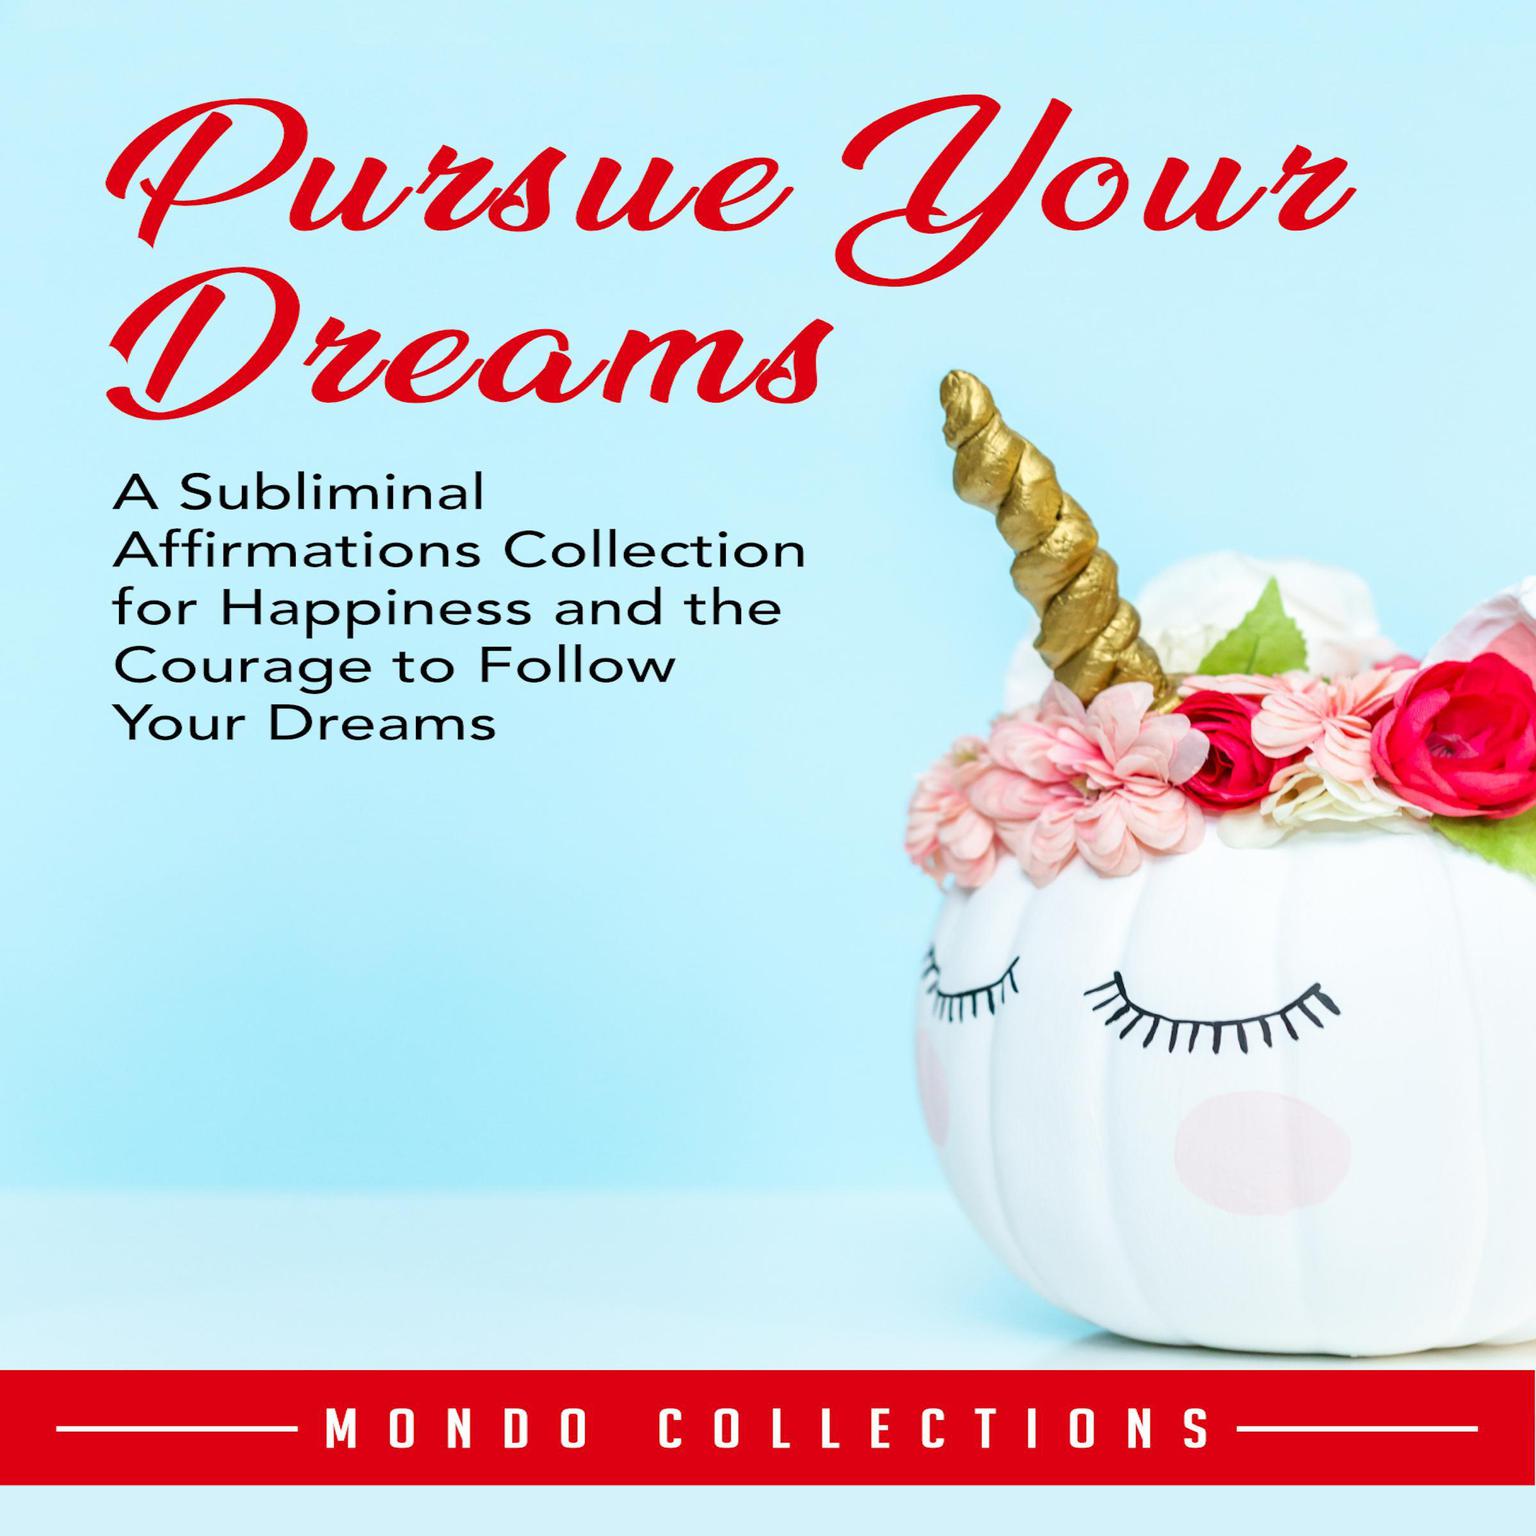 Pursue Your Dreams: A Subliminal Affirmations Collection for Happiness and the Courage to Follow Your Dreams Audiobook, by Mondo Collections